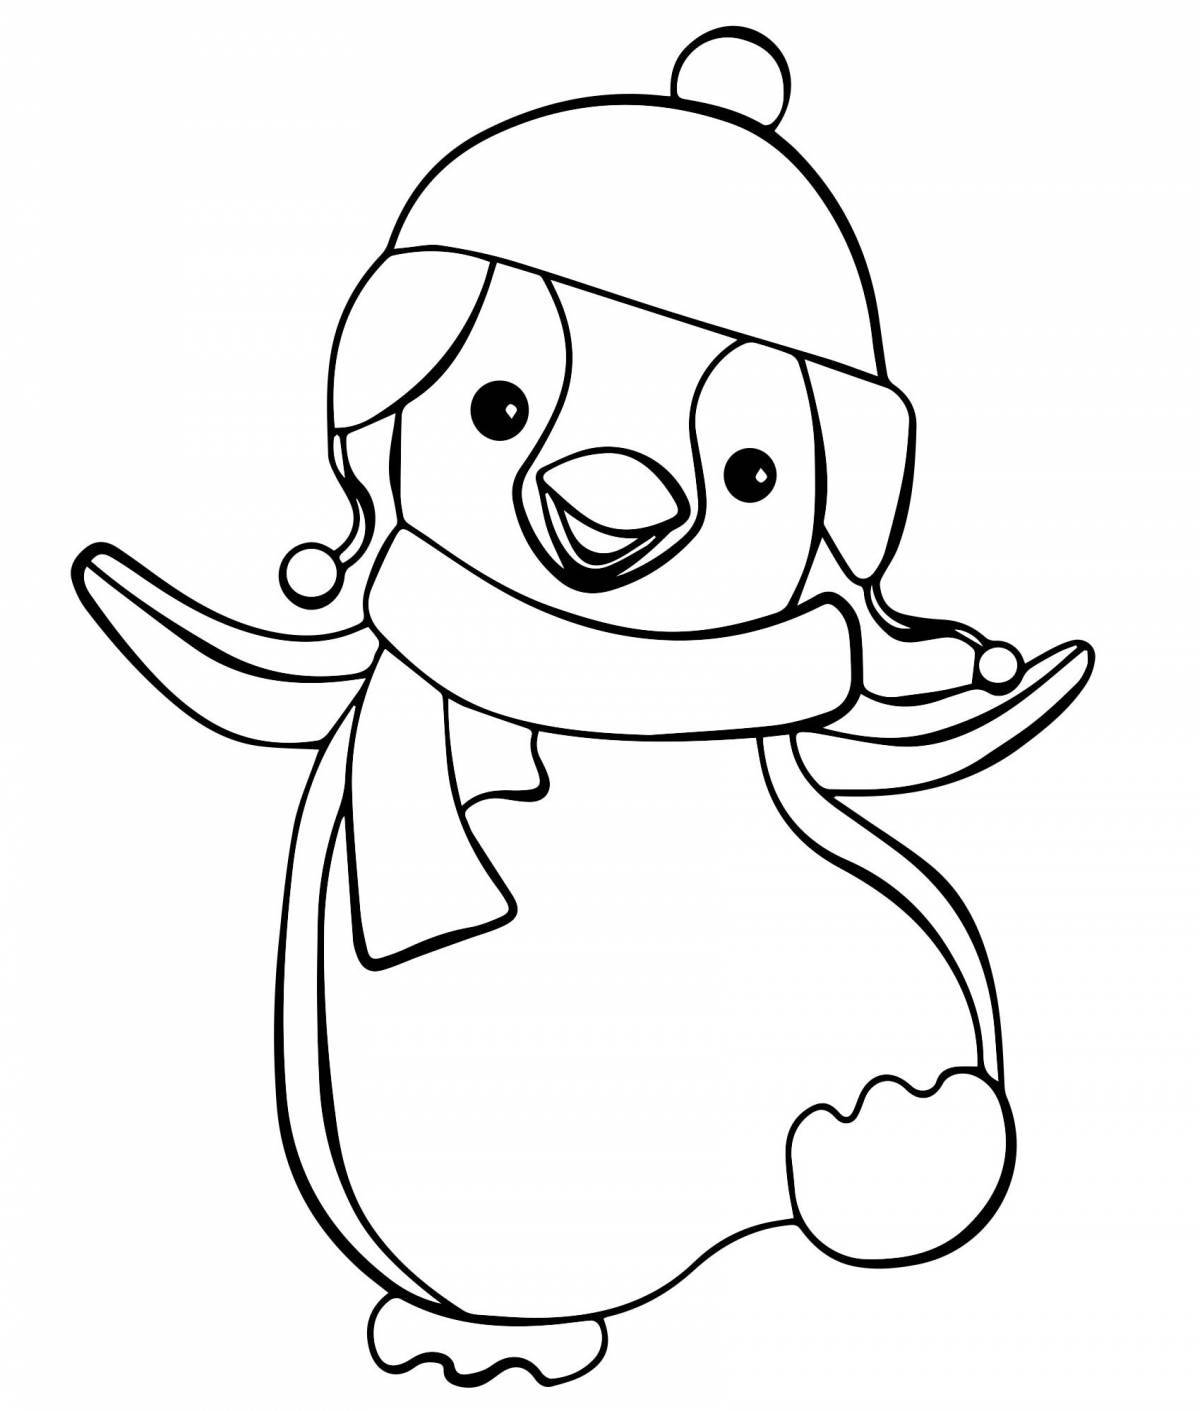 Gorgeous penguin coloring pages for kids